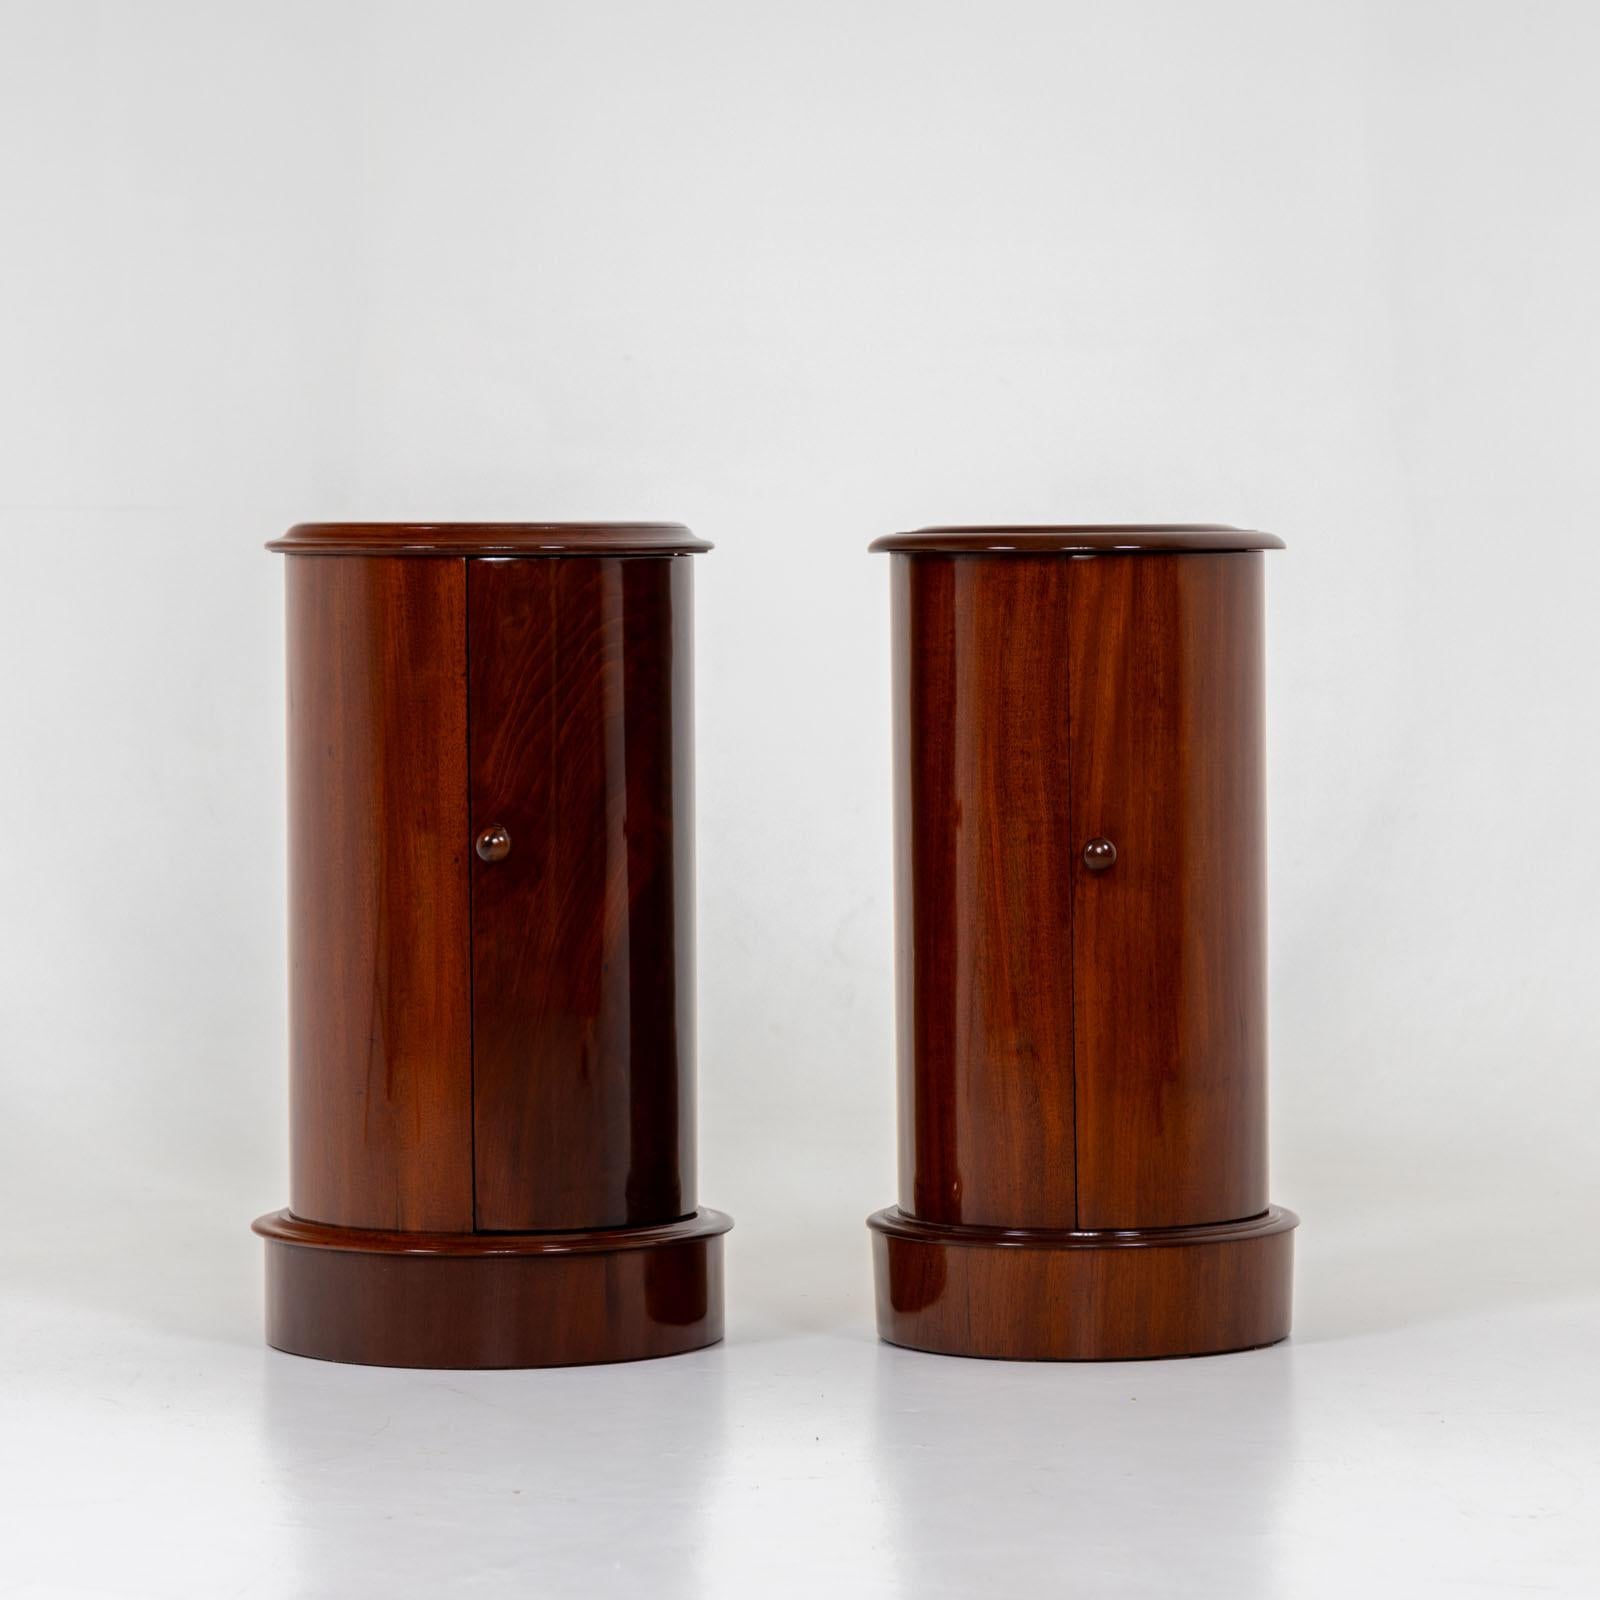 Two drum cabinets, each with one door and marble inlay on the surface. The cabinets are made of mahogany and have been polished by hand. The cabinets are not a real pair, but are similar enough to enrich any living room as a duo.